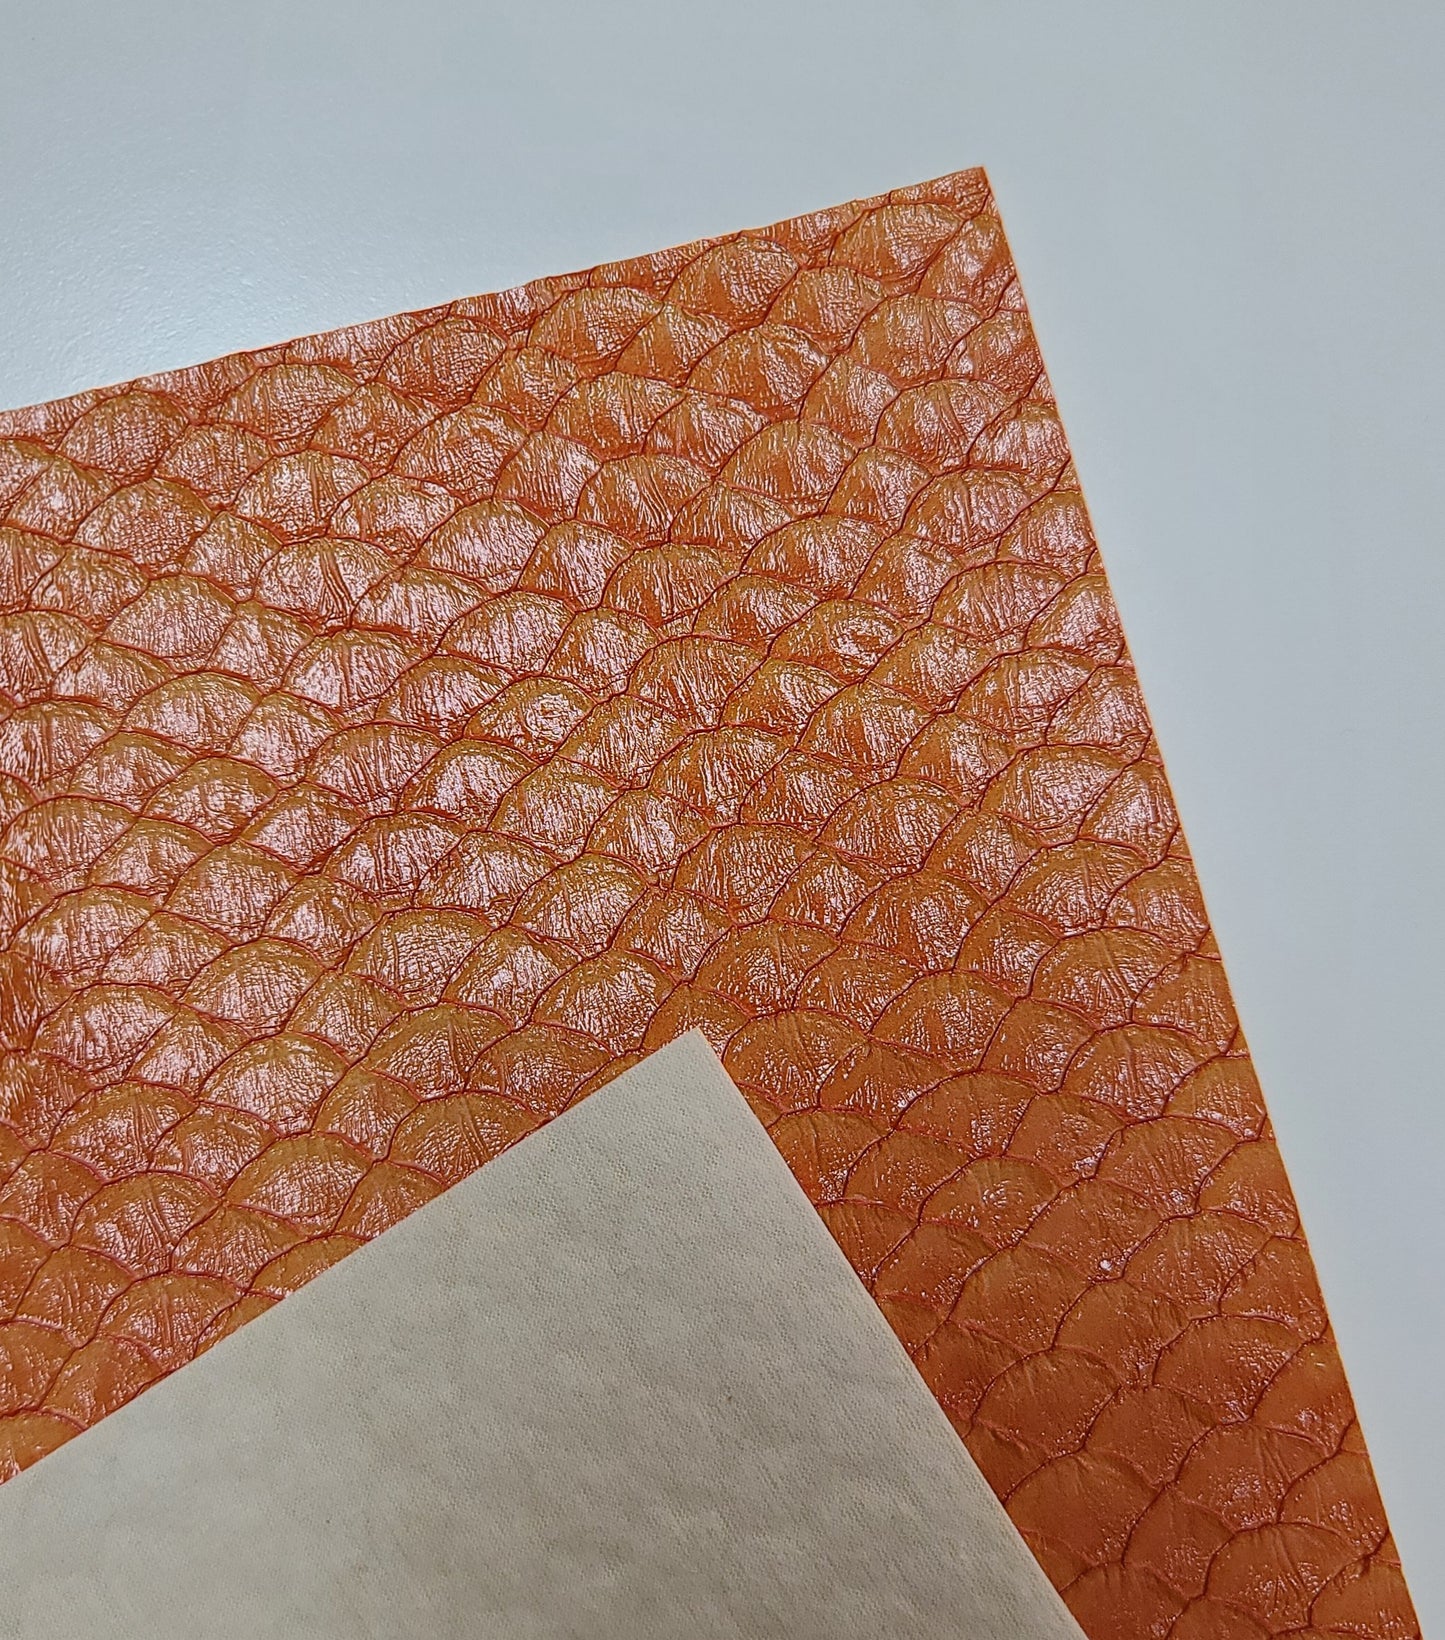 Textured Scales Fabric Sheet